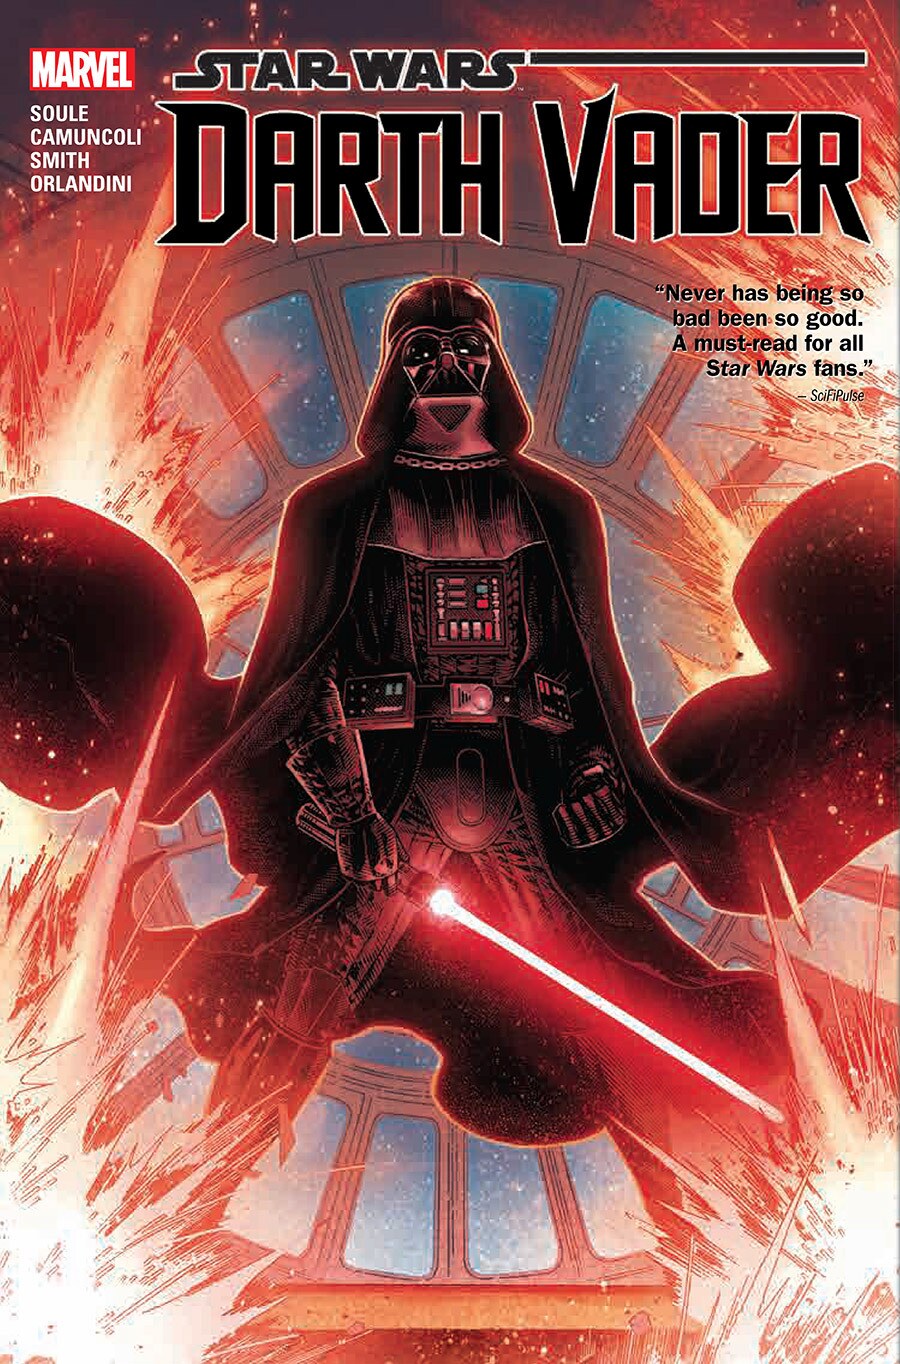 The cover of Marvel's Darth Vader collection.